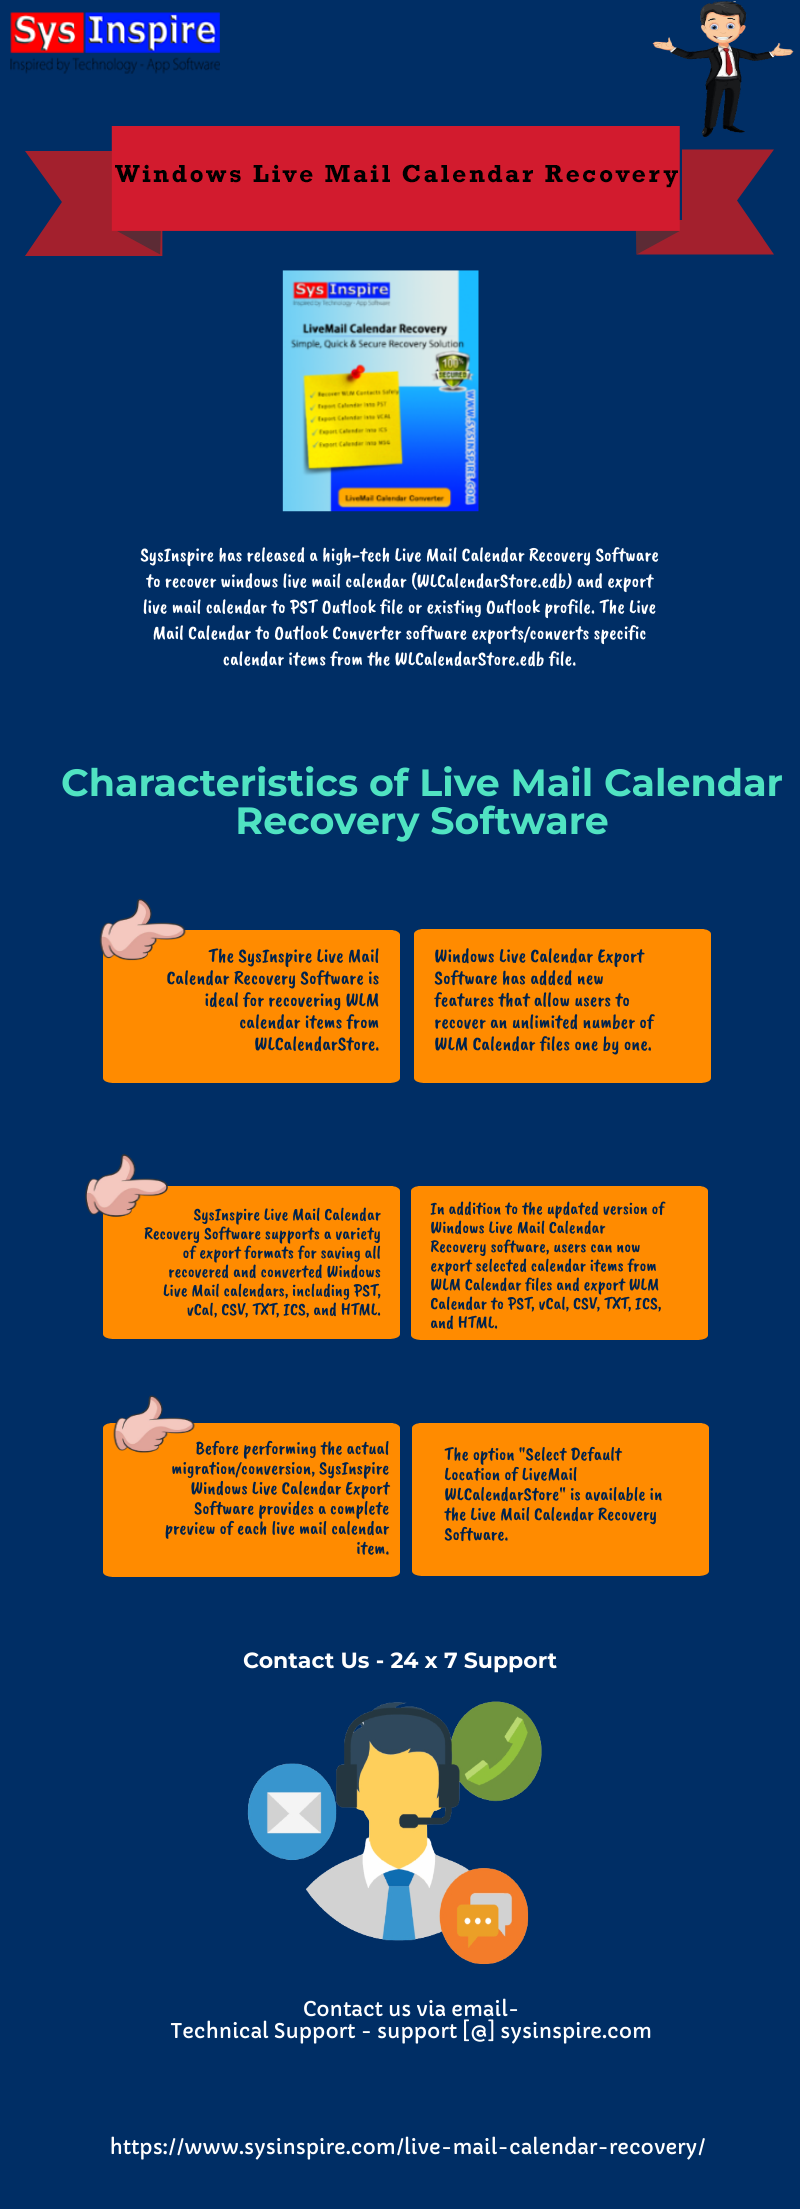 windowslivemailcalendarrecovery.png